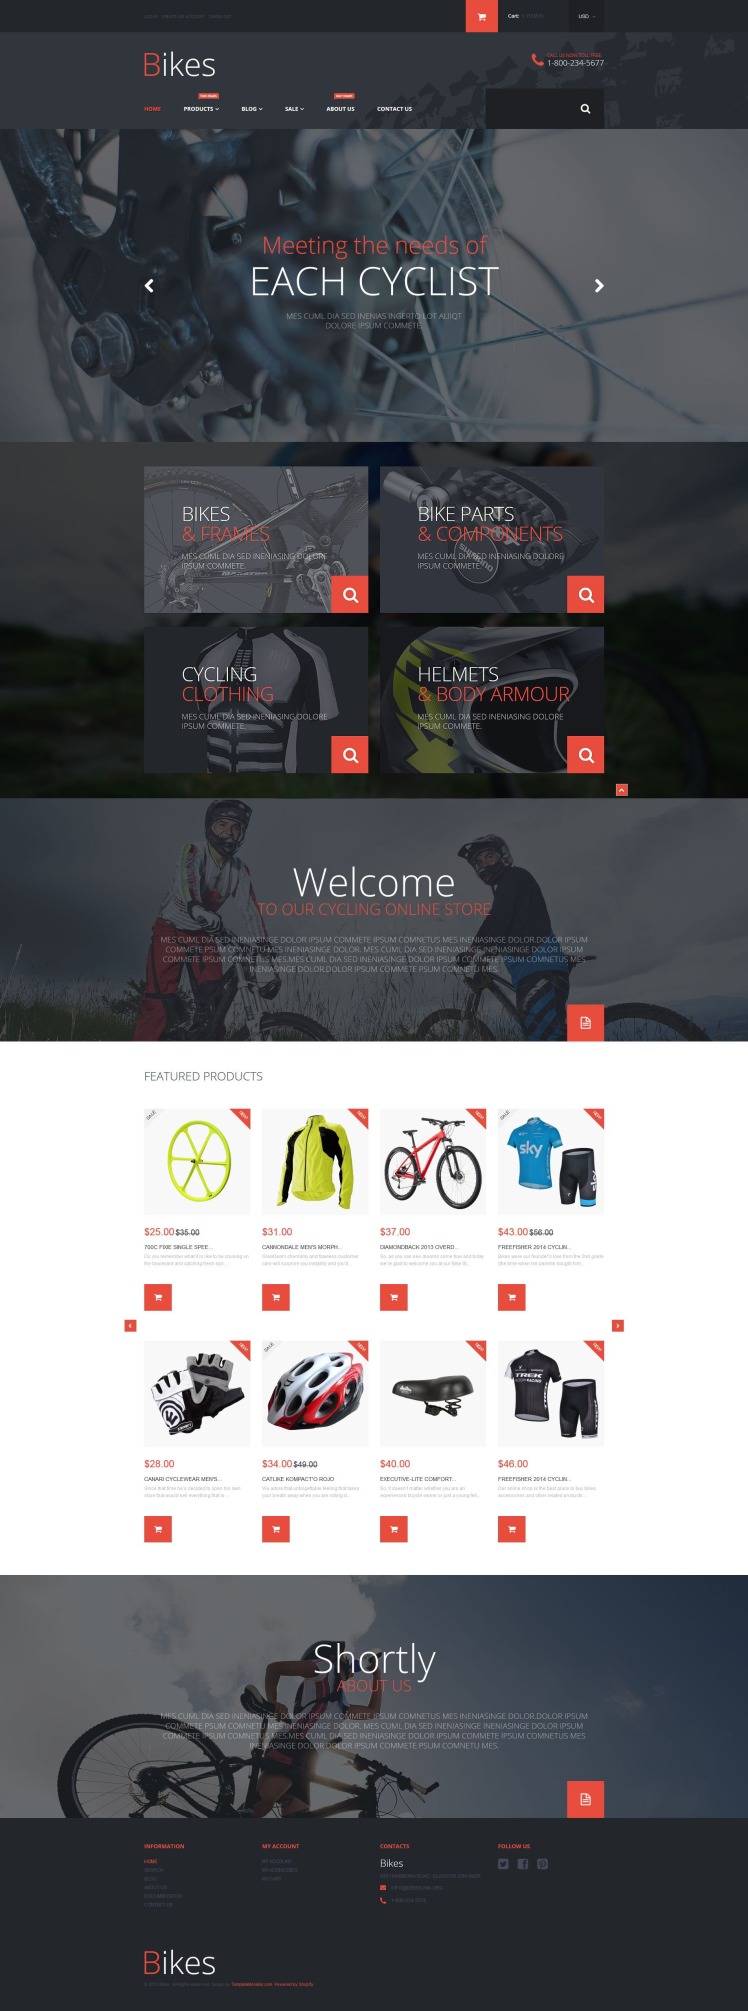 Bike Store Shopify Theme for Cycling Websites